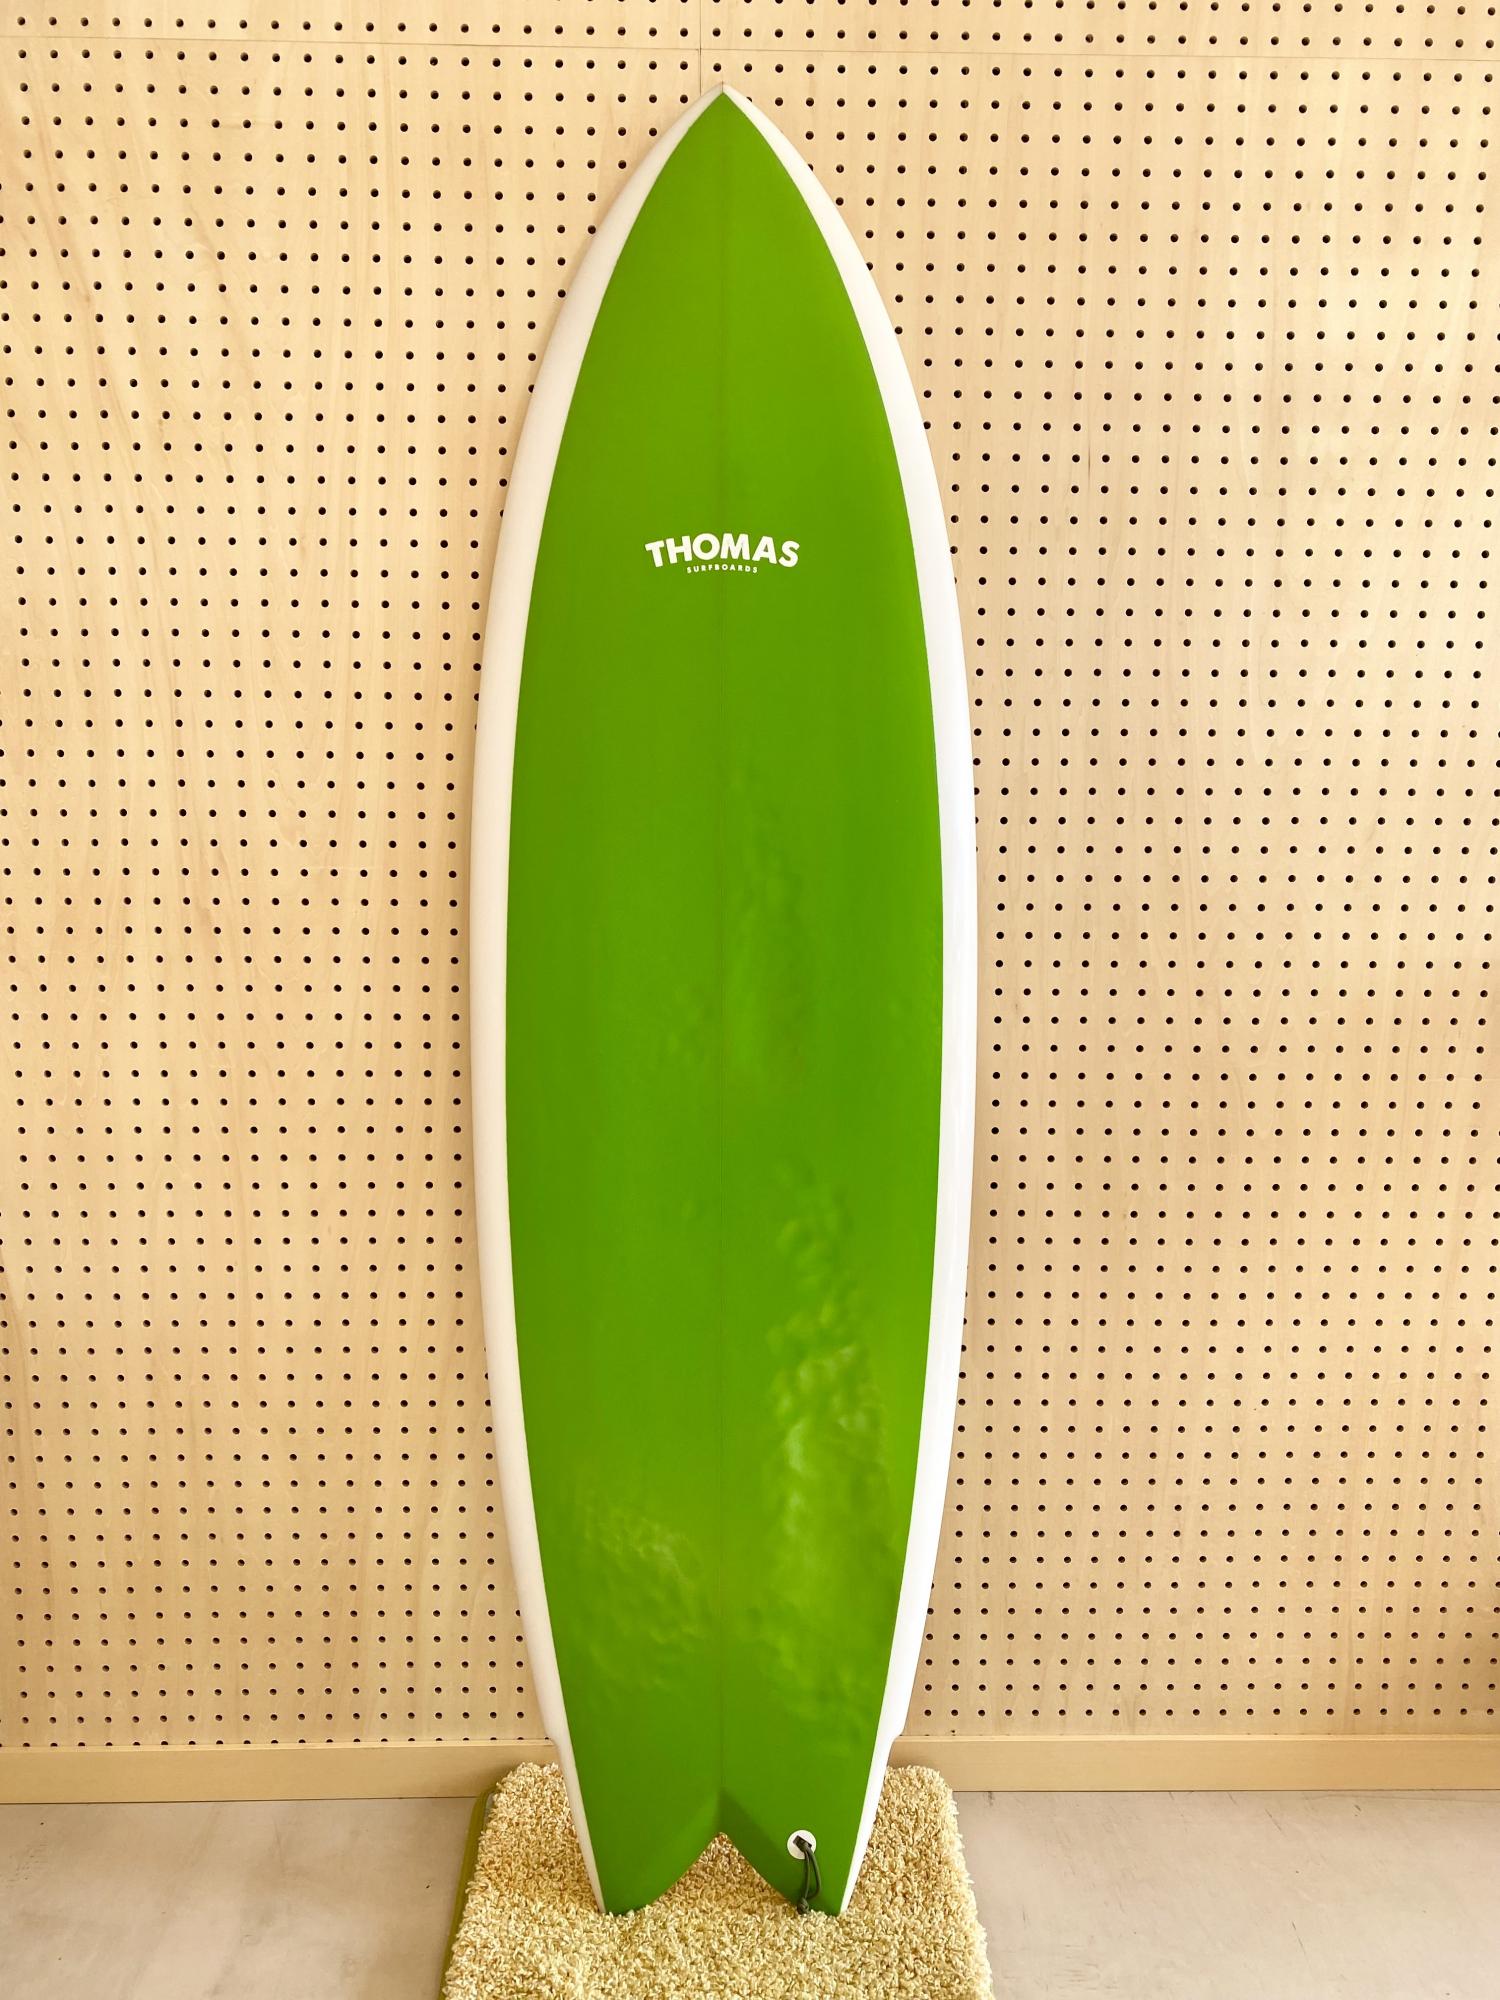 USED BOARDS (Thomas surfboards MOD FISH 5.10)